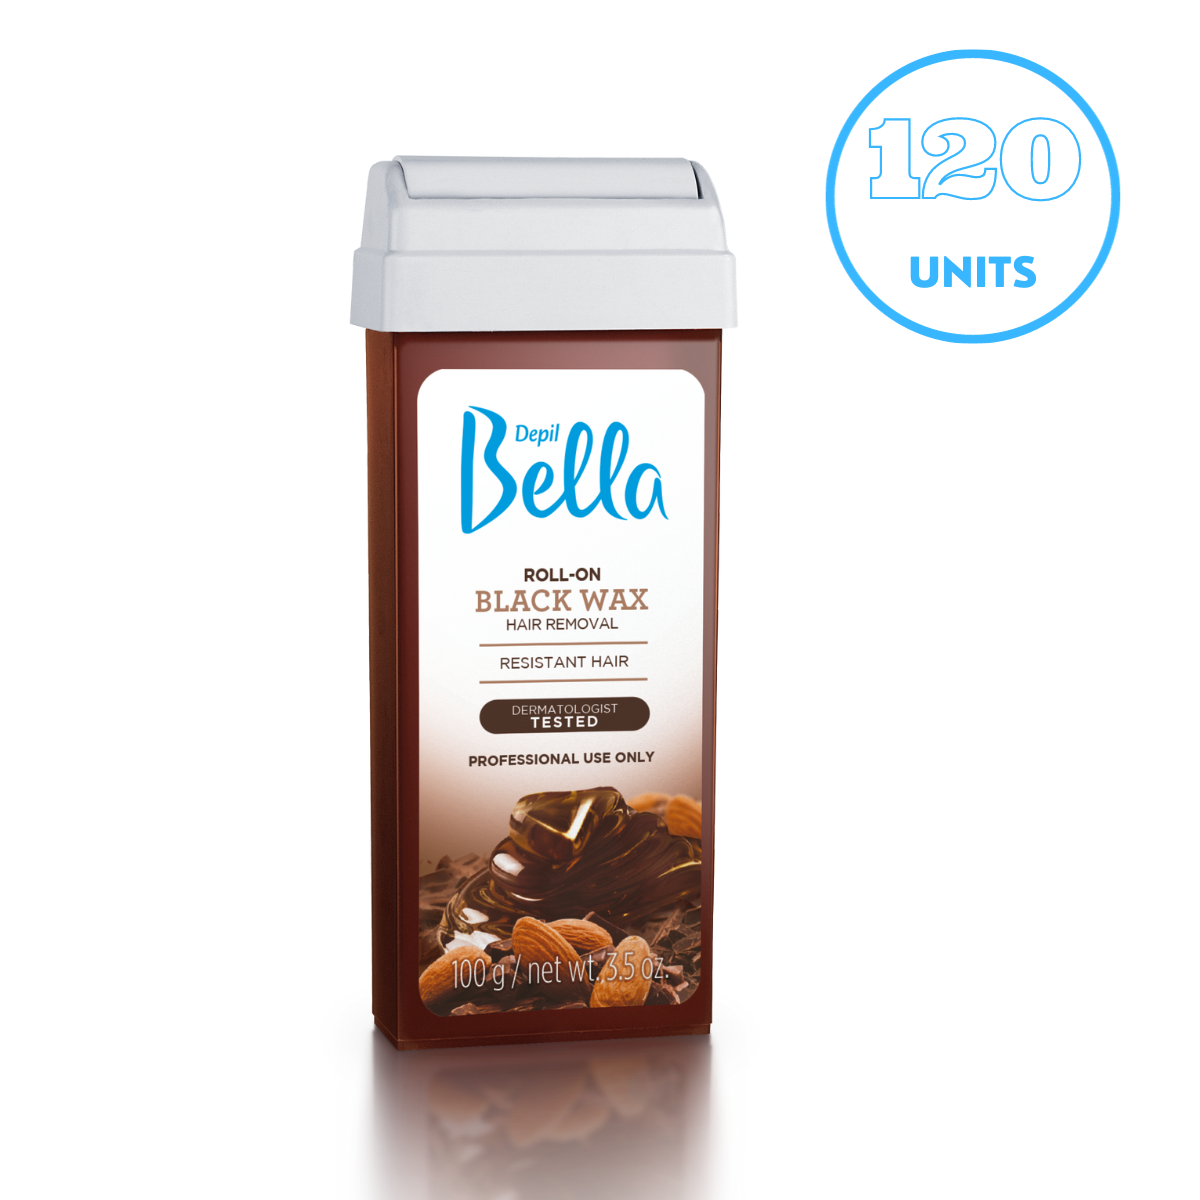 Depil Bella Roll-On Black Wax with Almond and Cocoa Oils - 3.52oz (120 Units Offer) - Buy professional cosmetics dedicated to hair removal